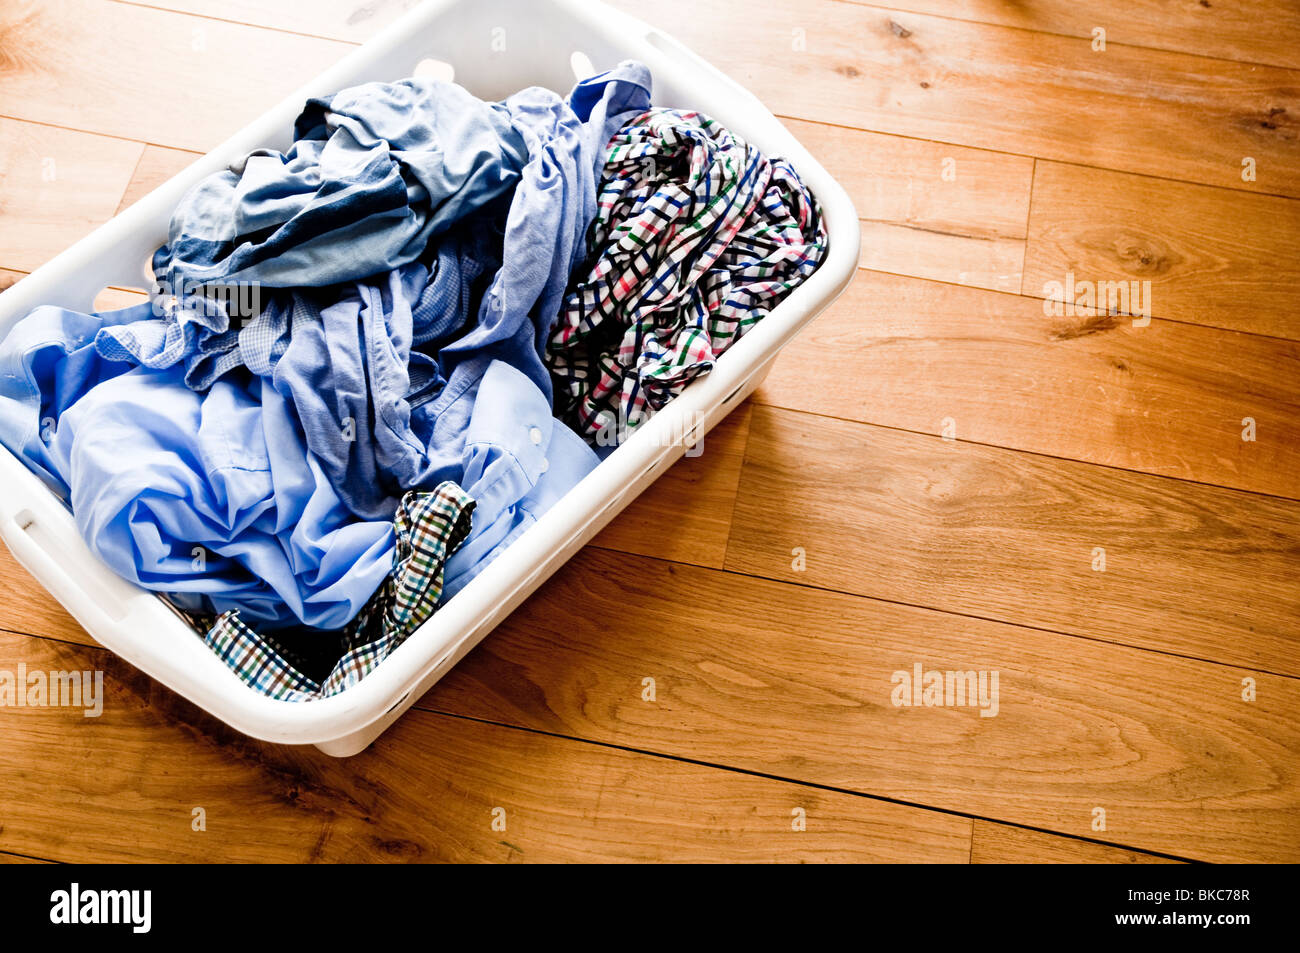 Washing in a basket, clean, wet and  ready to be hung out to dry Stock Photo